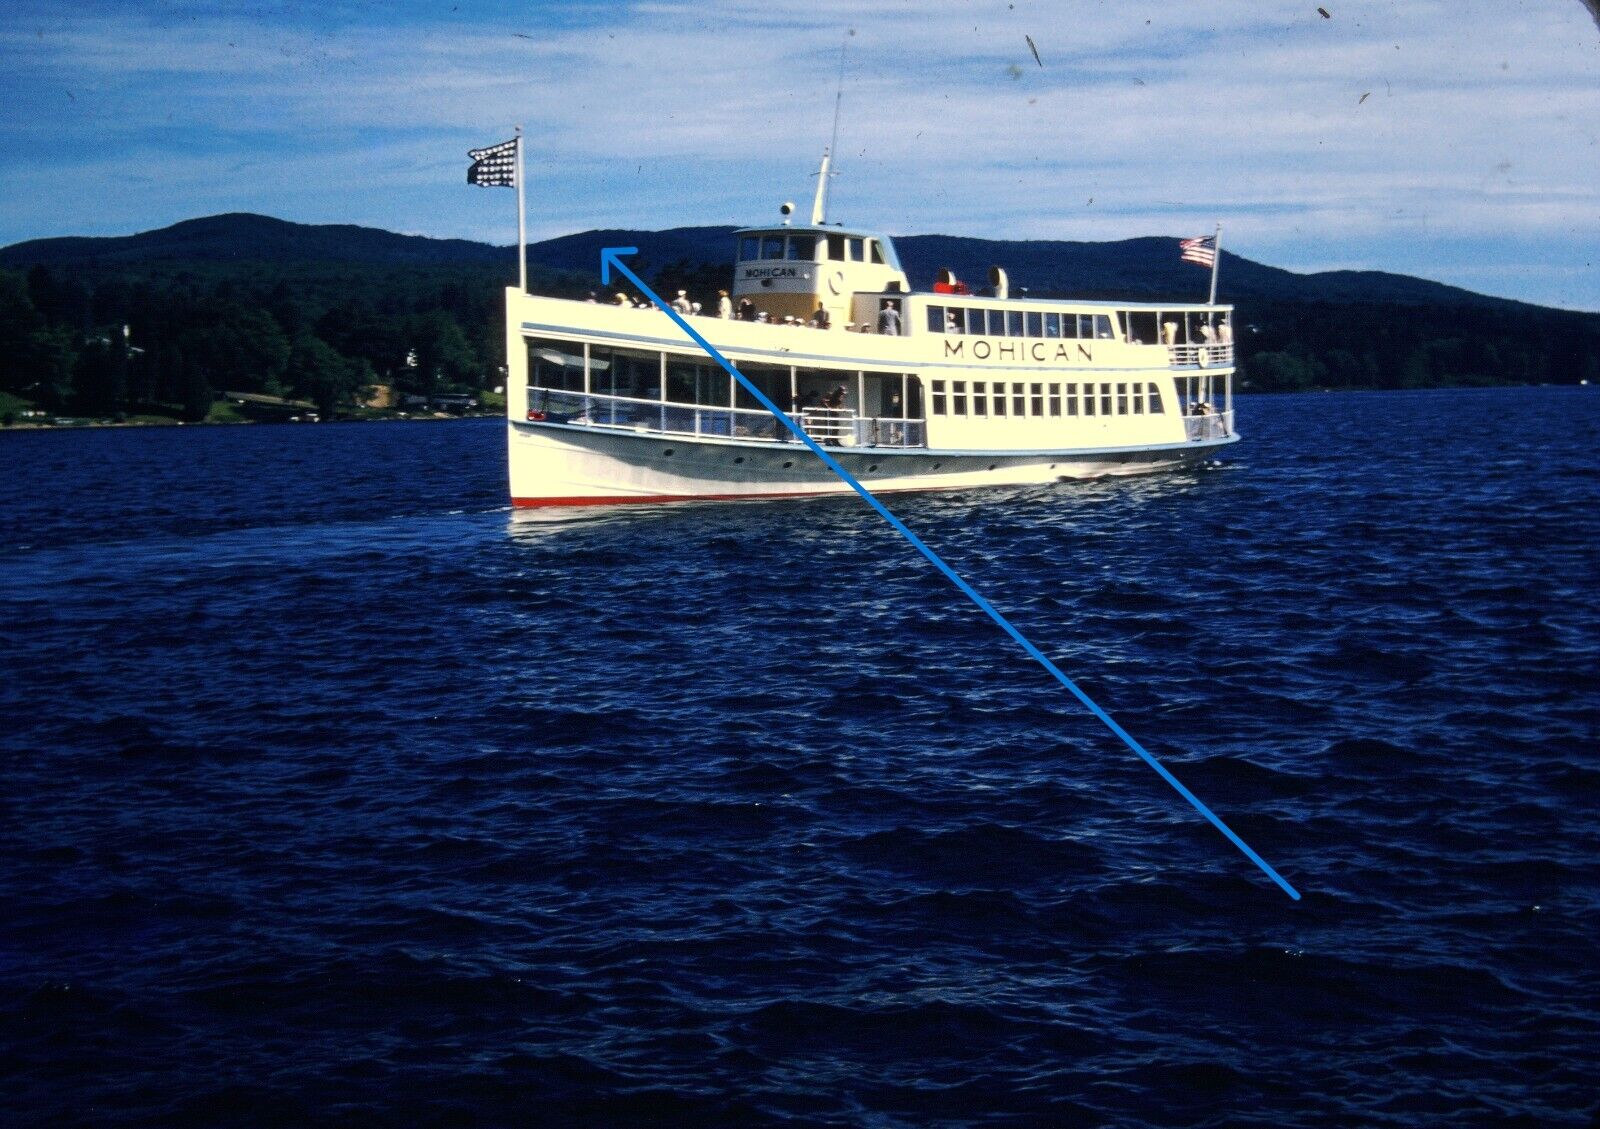 1950s 35mm Red Border Slides The Mohican Cruise Boat Lake George New York #1265